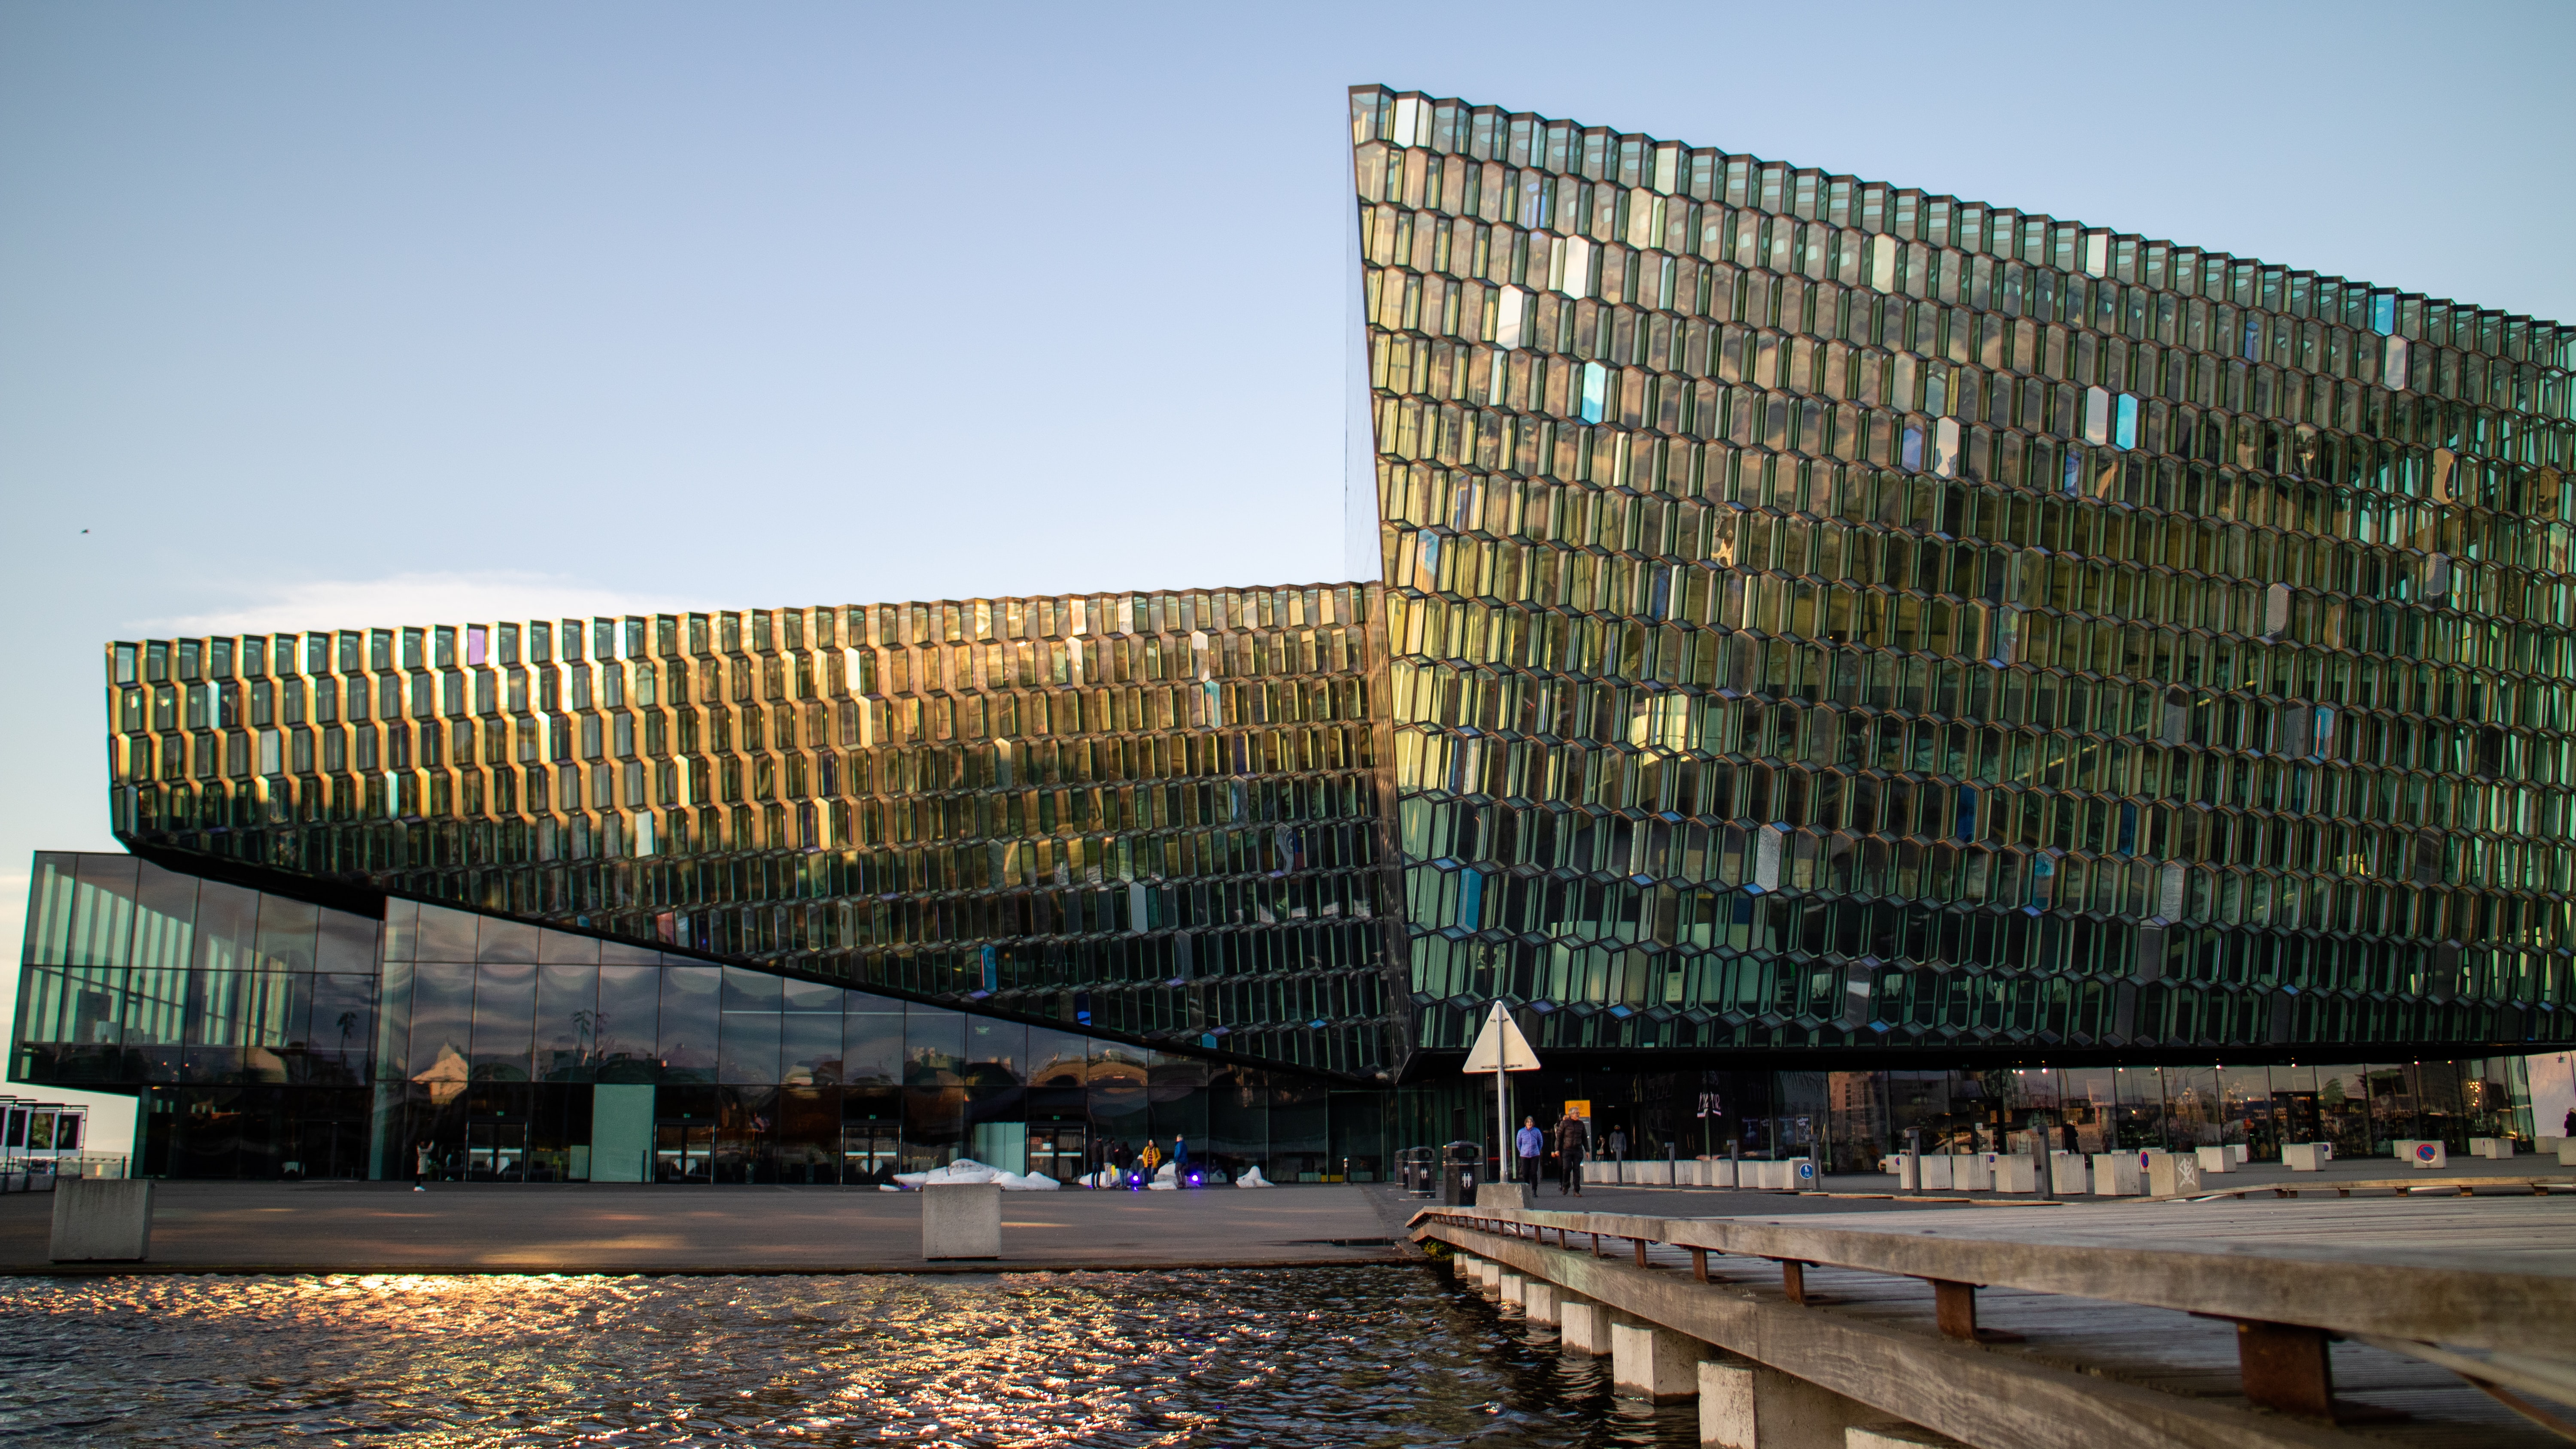 the modern sculpture Harpa 
Things to do in Reykjavik
